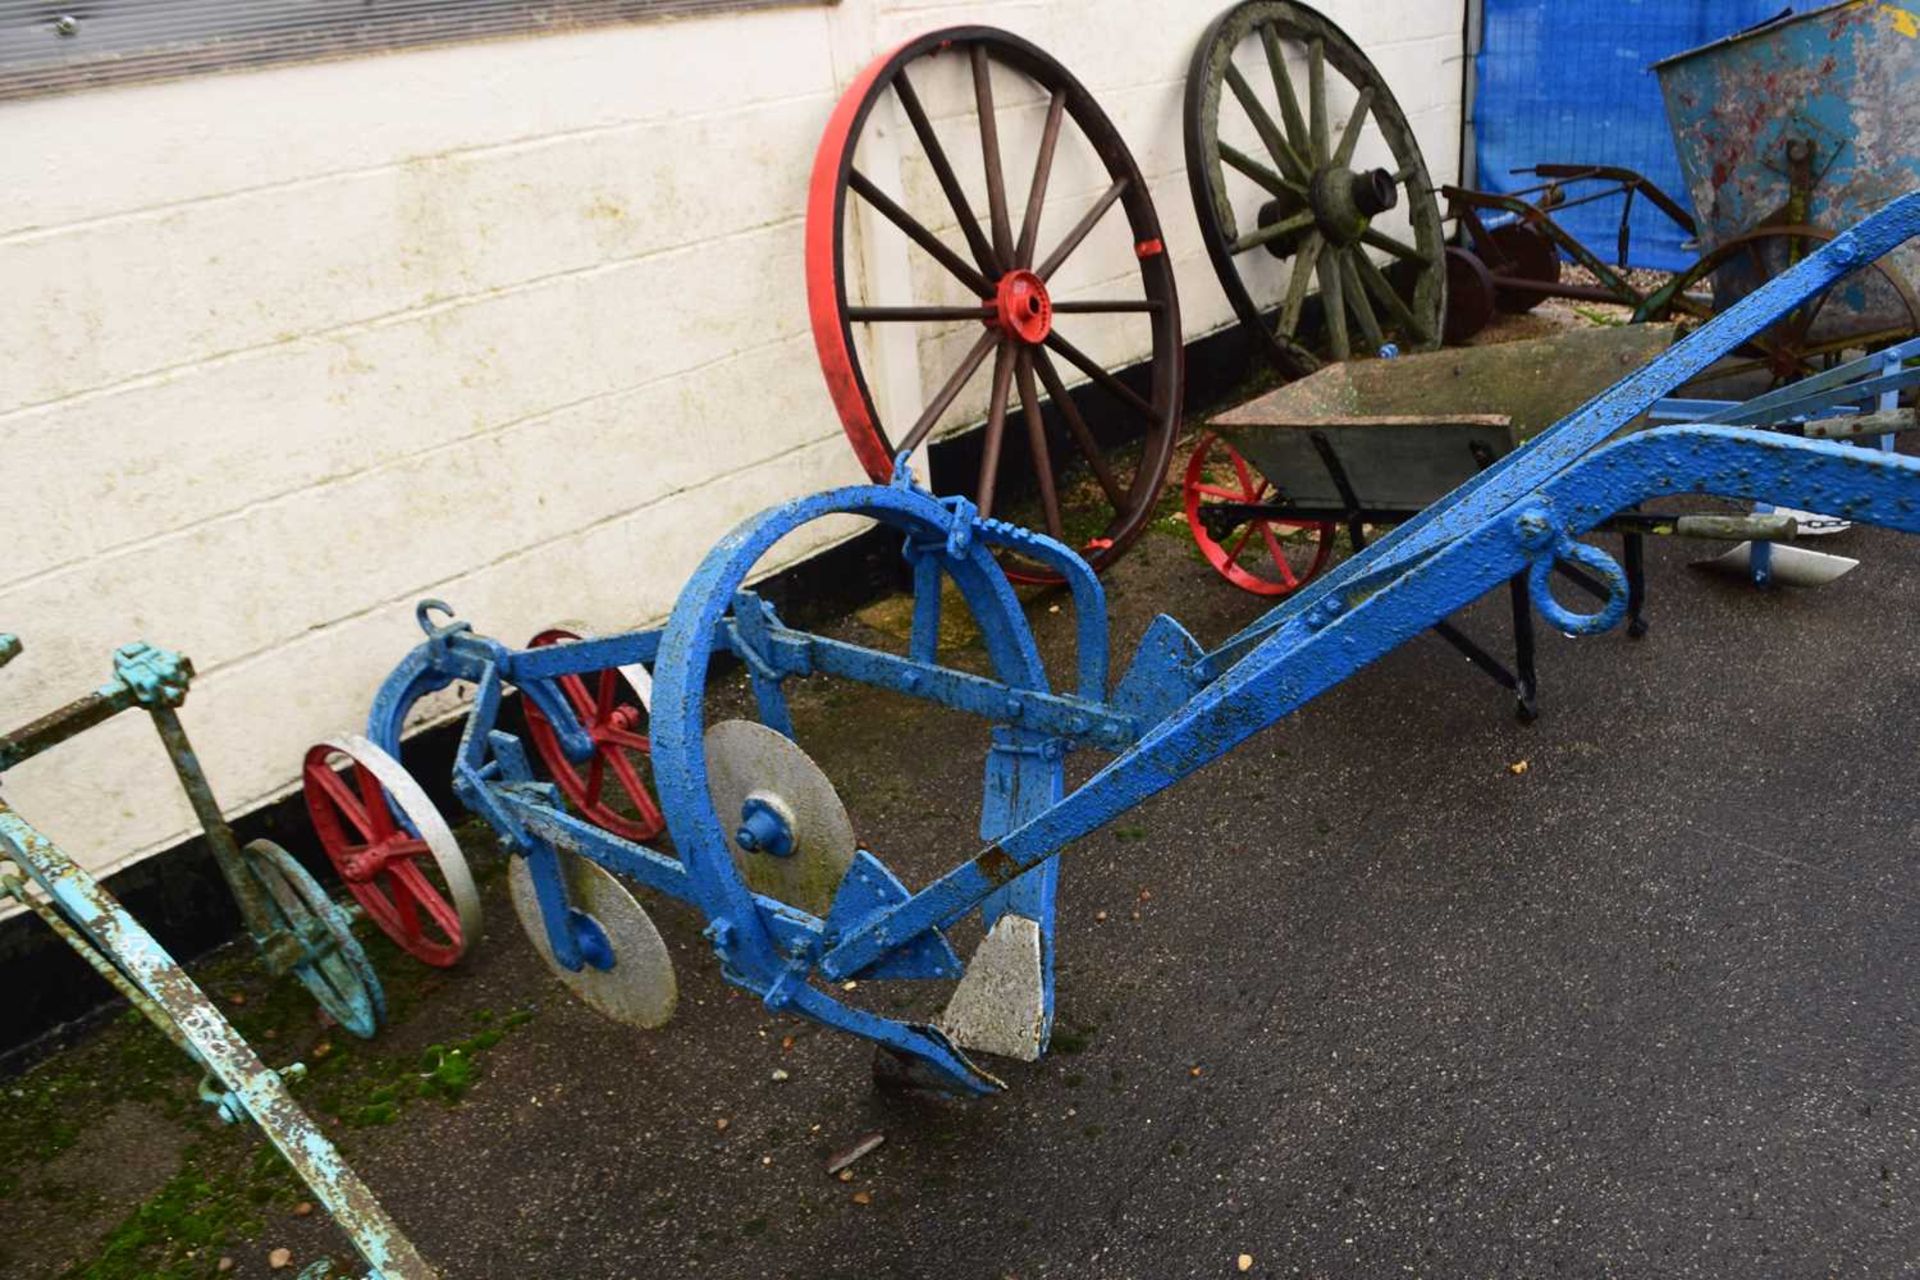 A horse drawn iron framed cultivator with discs, the body painted blue